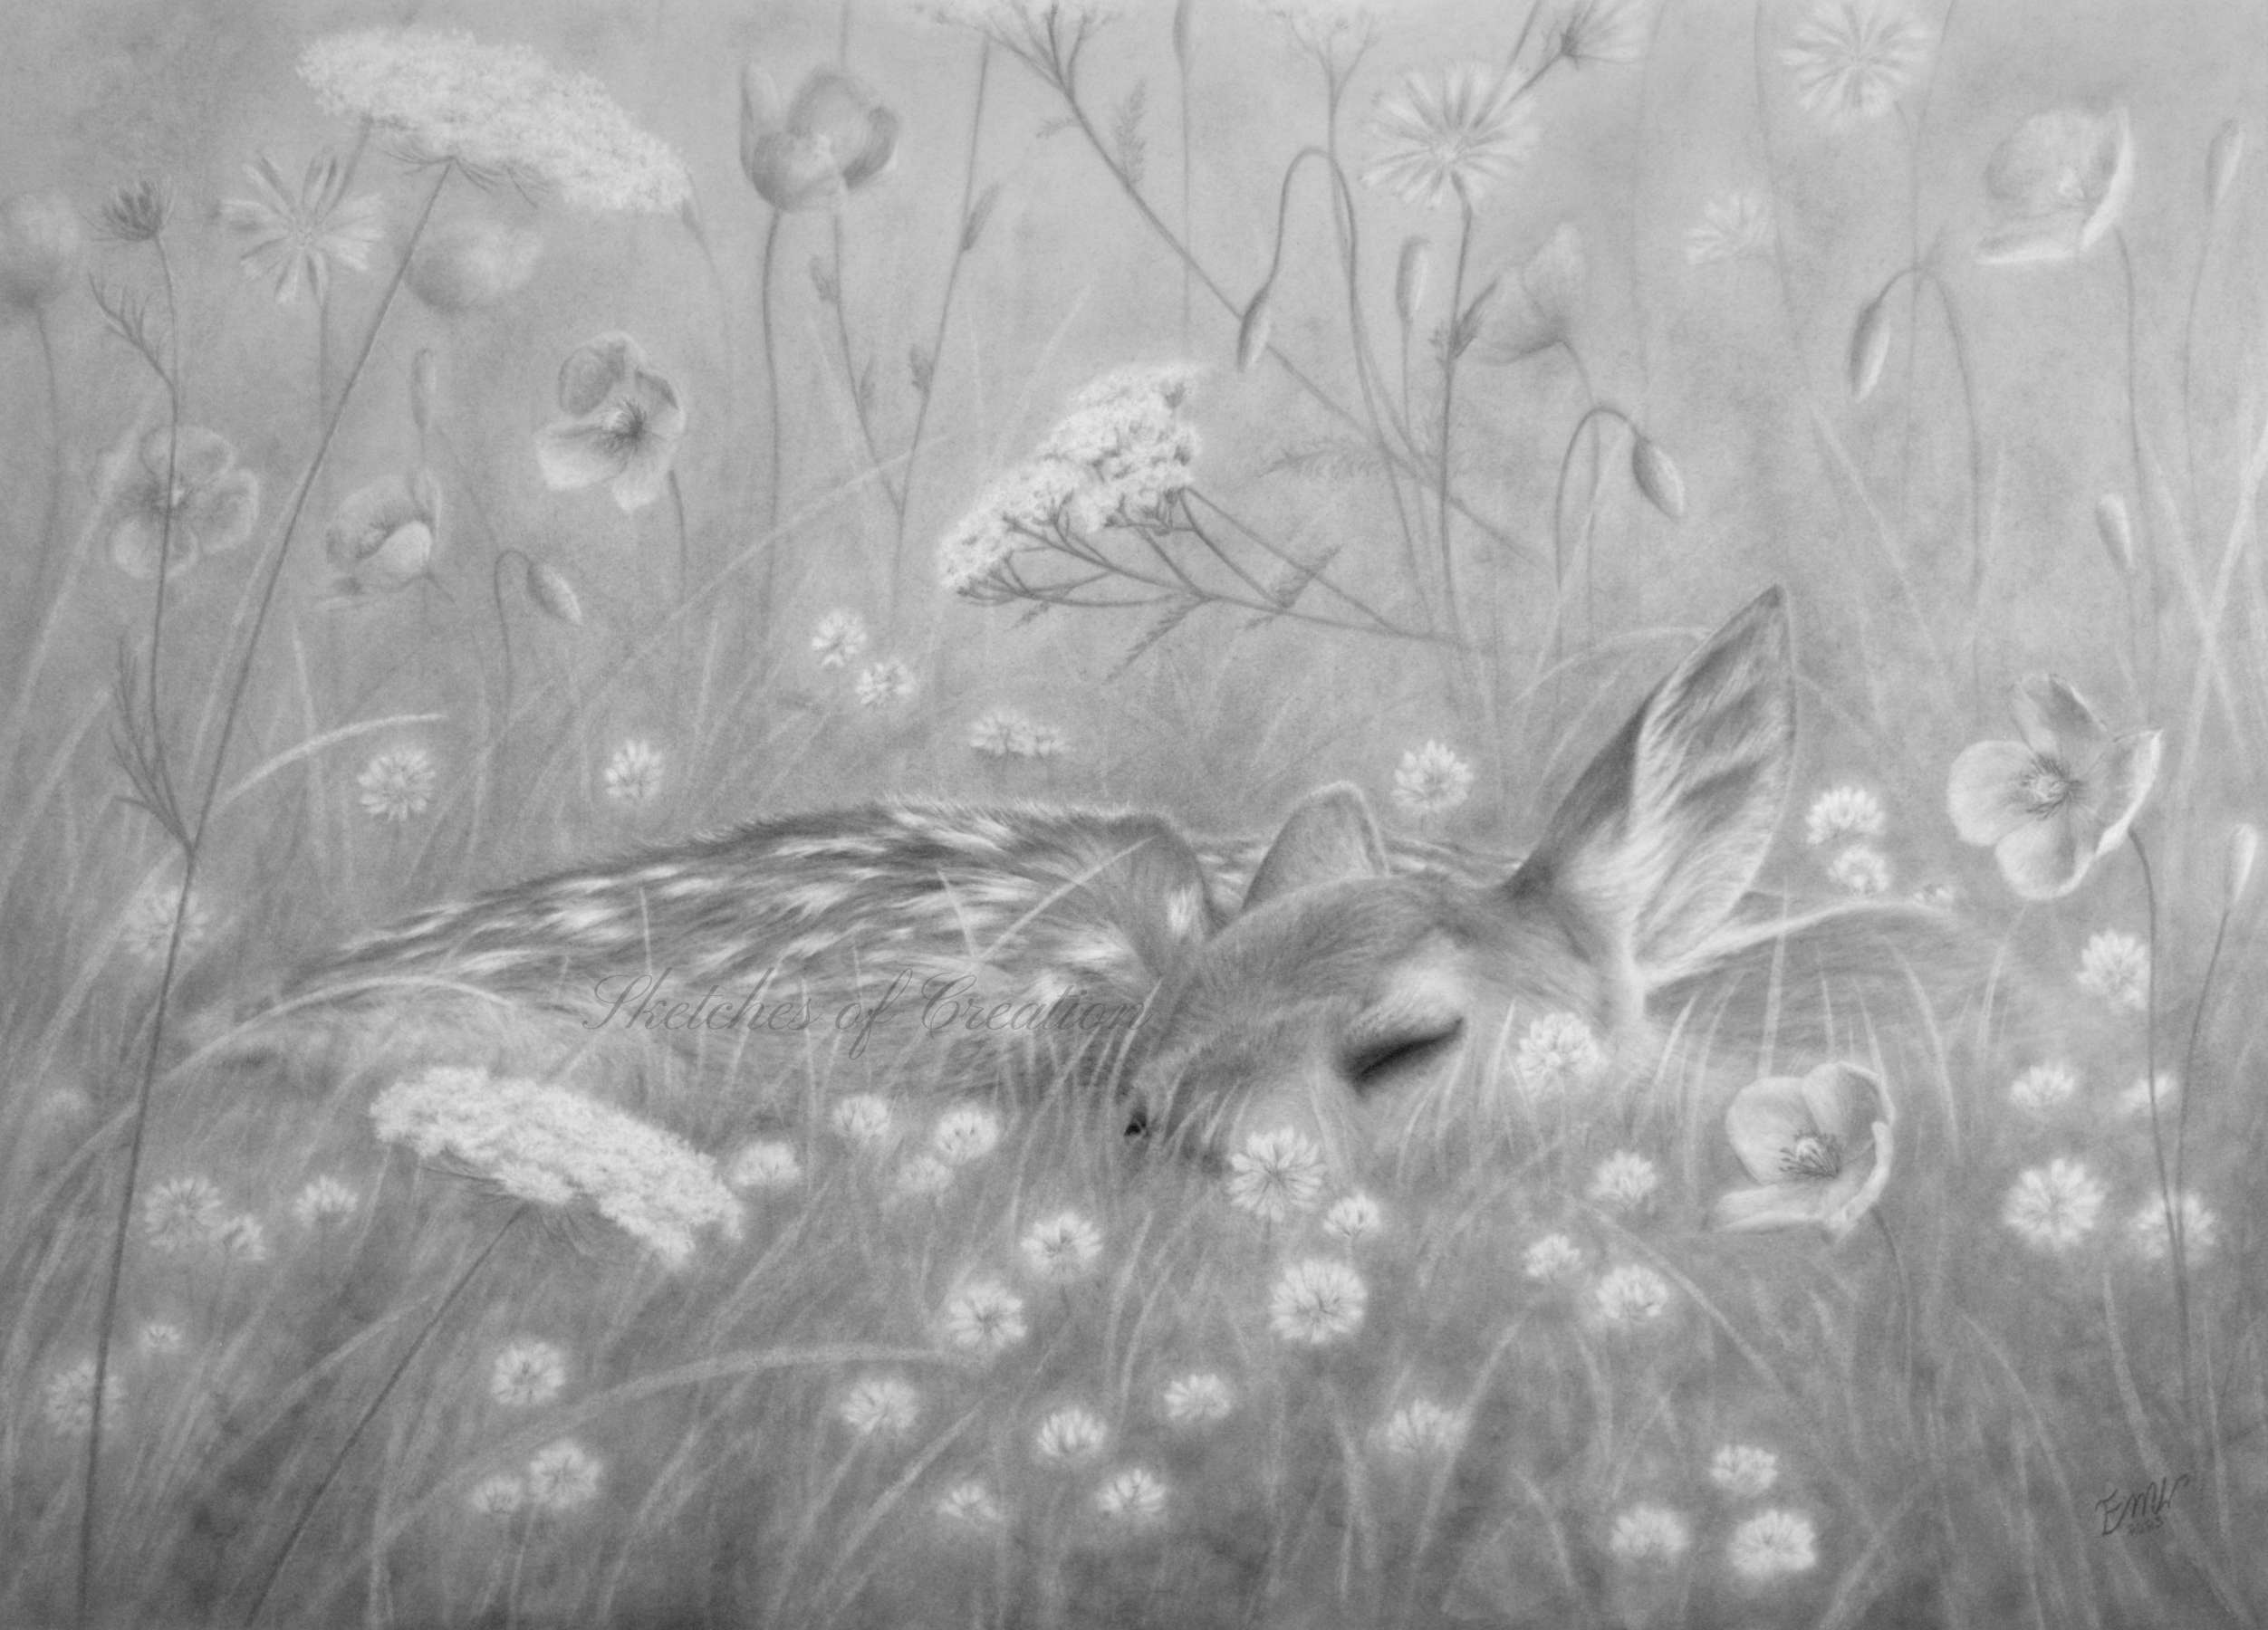 A drawing of a sleeping fawn in flowers